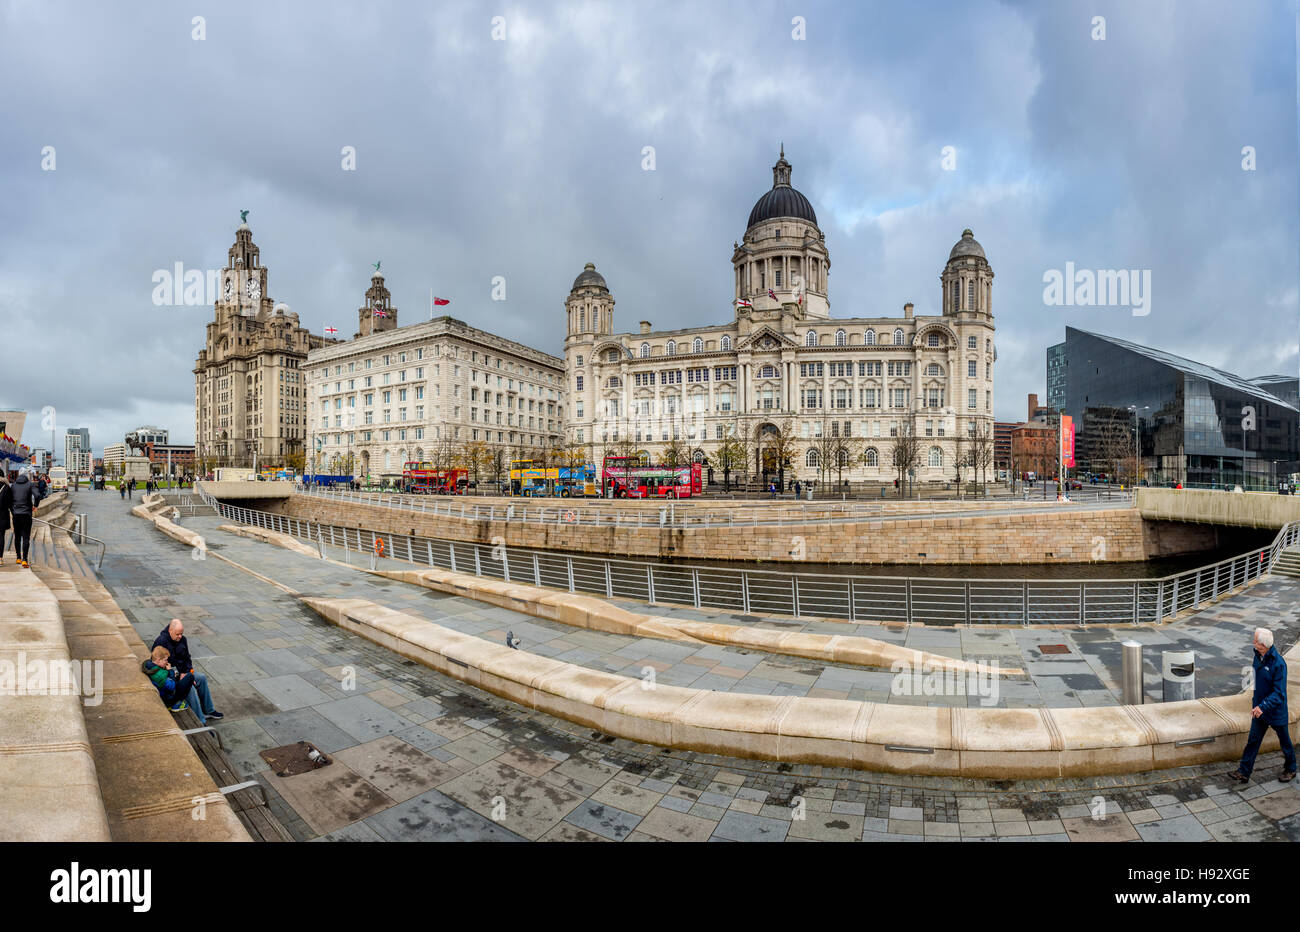 The Three Graces of Liverpool; The Royal Liver Building, The Cunard Building and the Port of Liverpool Building at the Pier Head Stock Photo